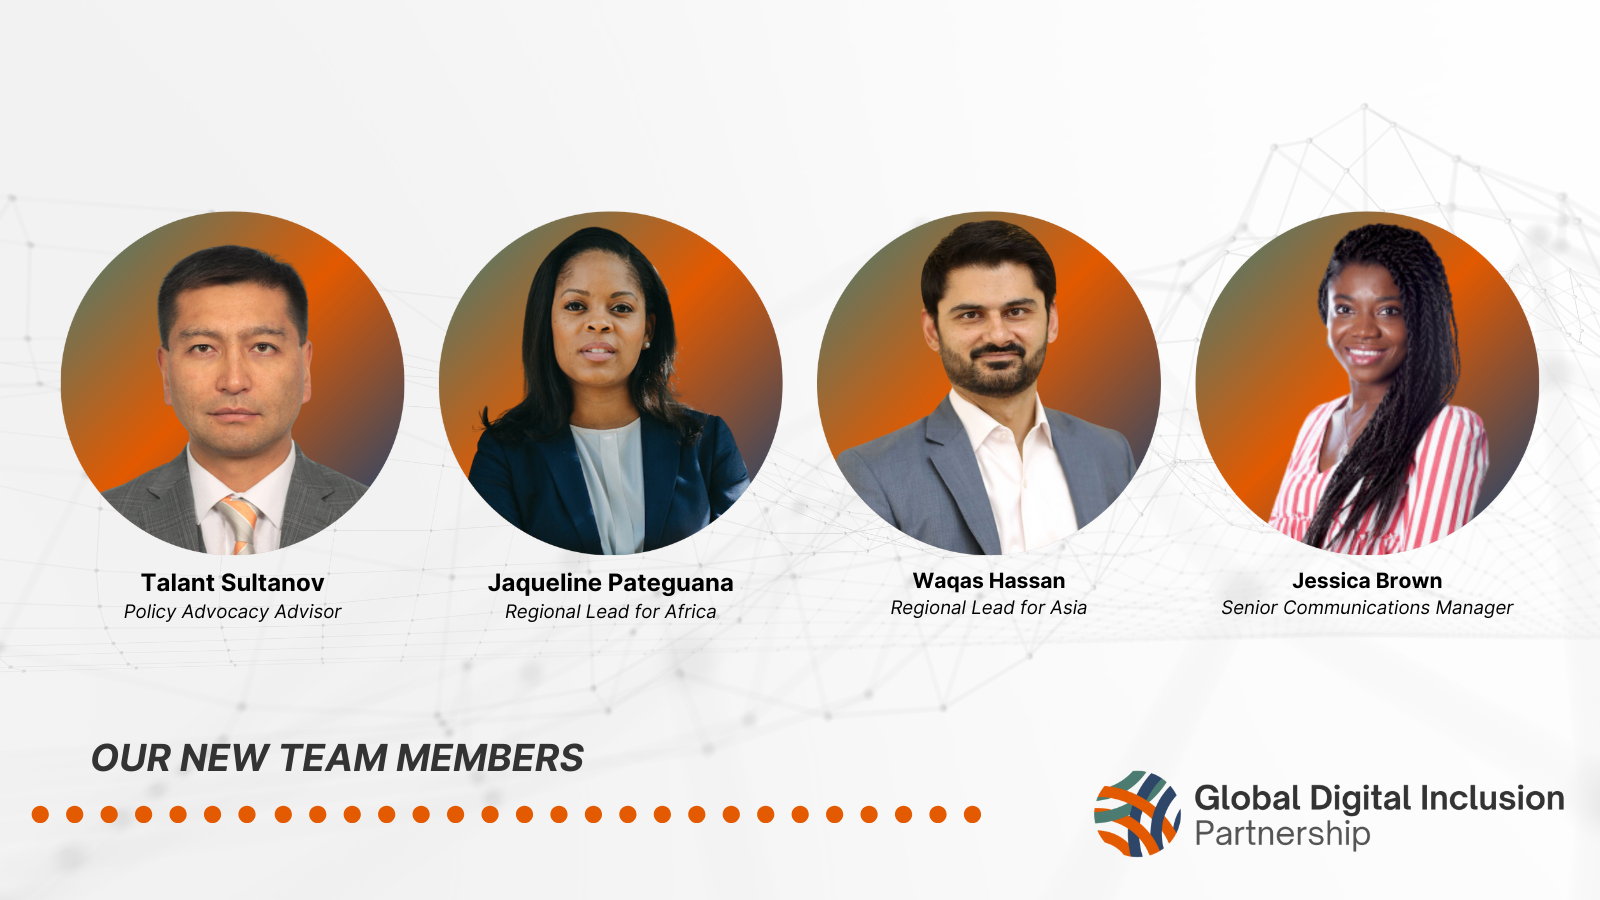 Graphic showing GDIP's new team members: Talant Sultanov, Policy Advocacy Advisor; Jaqueline Pateguana, Regional Lead for Africa; Waqas Hassan, Regional Lead for Asia; and  Jessica Brown, Senior Communications Manager.